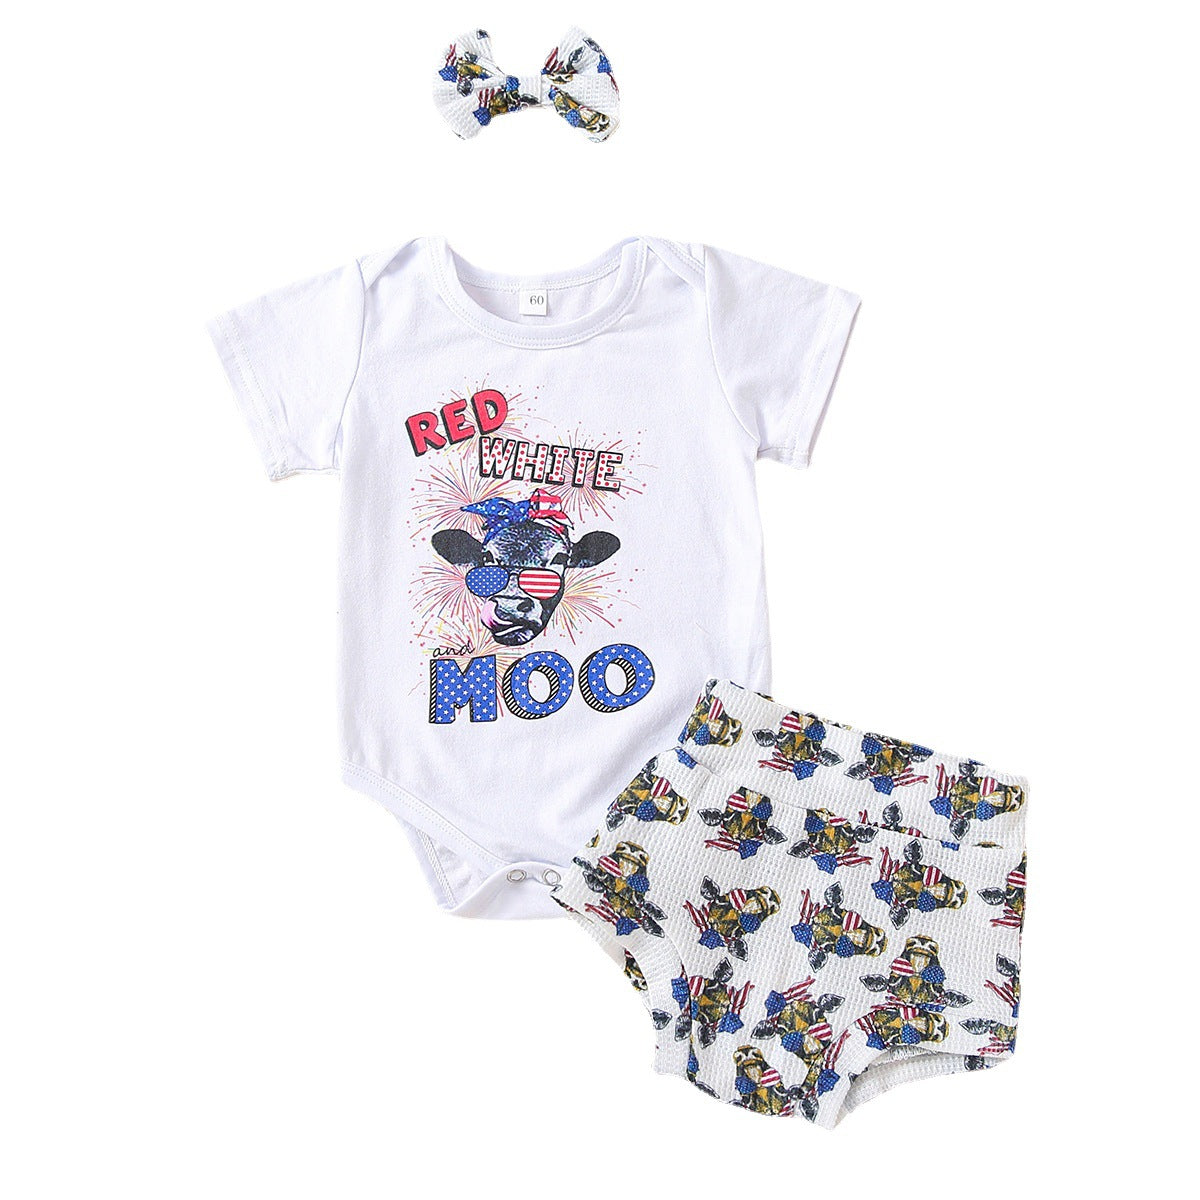 Baby Independence Day Suits.